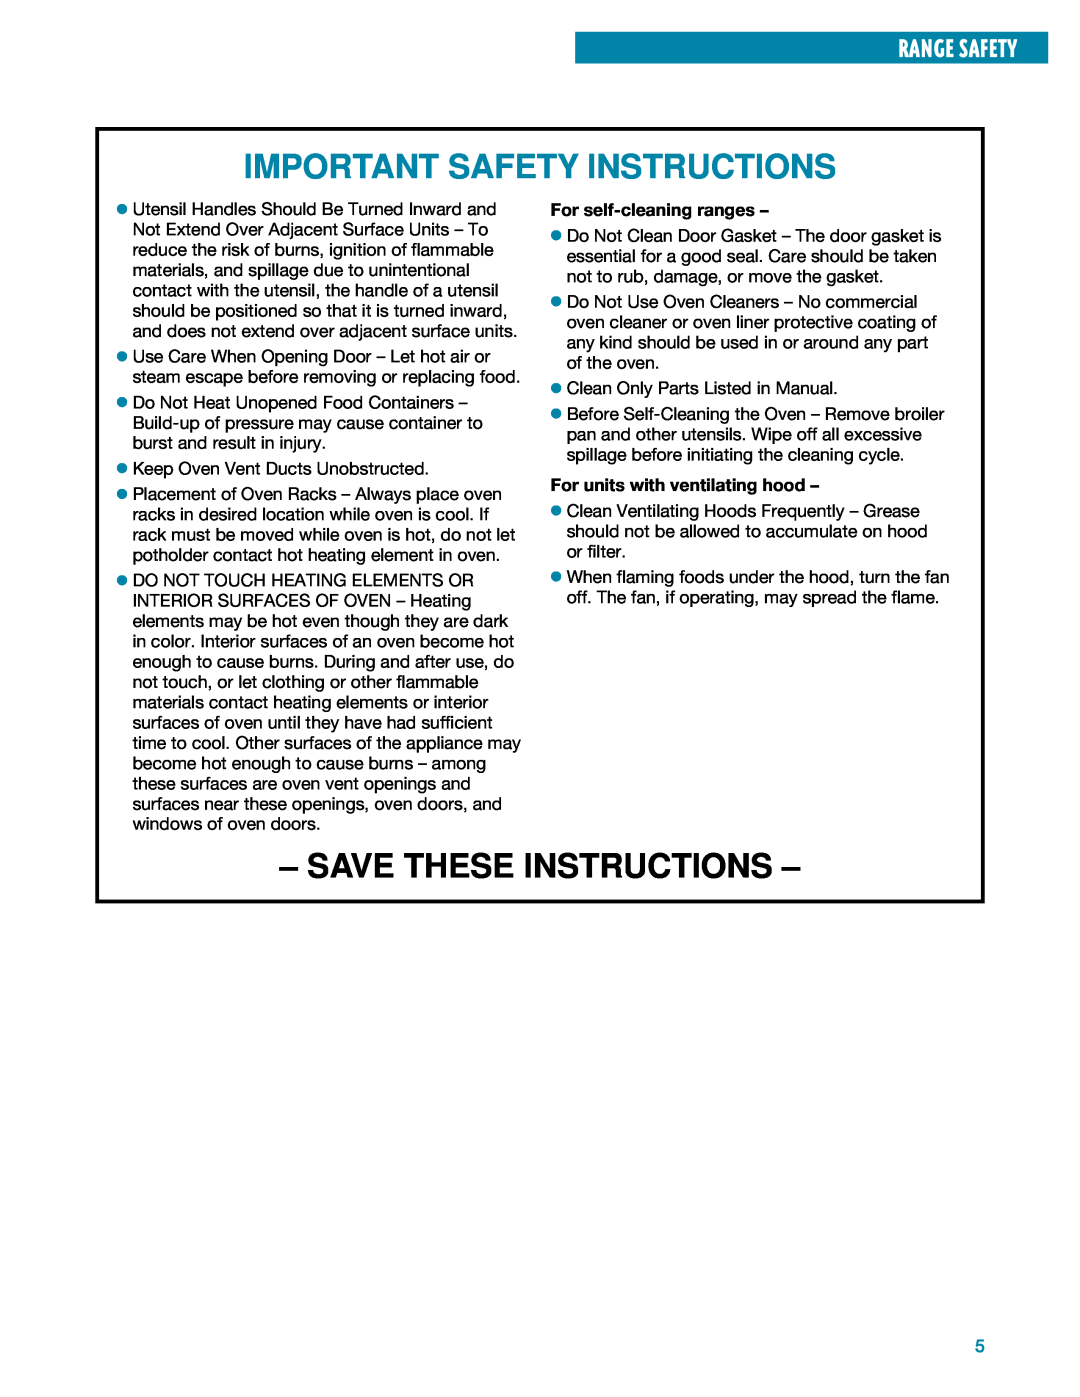 Whirlpool SF385PEE warranty Important Safety Instructions, Save These Instructions, Range Safety, For self-cleaning ranges 